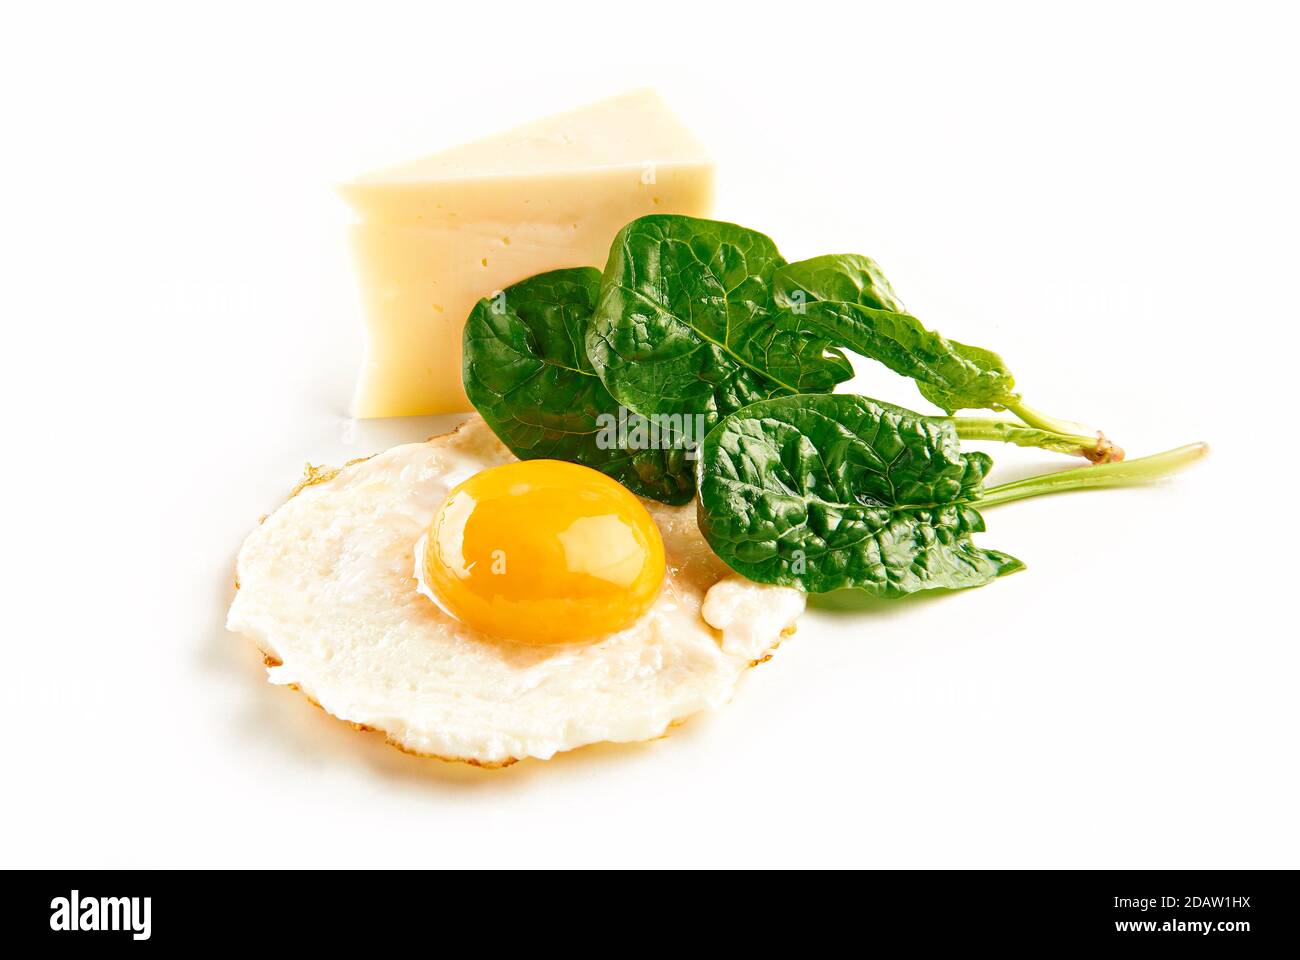 Fried egg, with spinach and cheese, over white background. Stock Photo